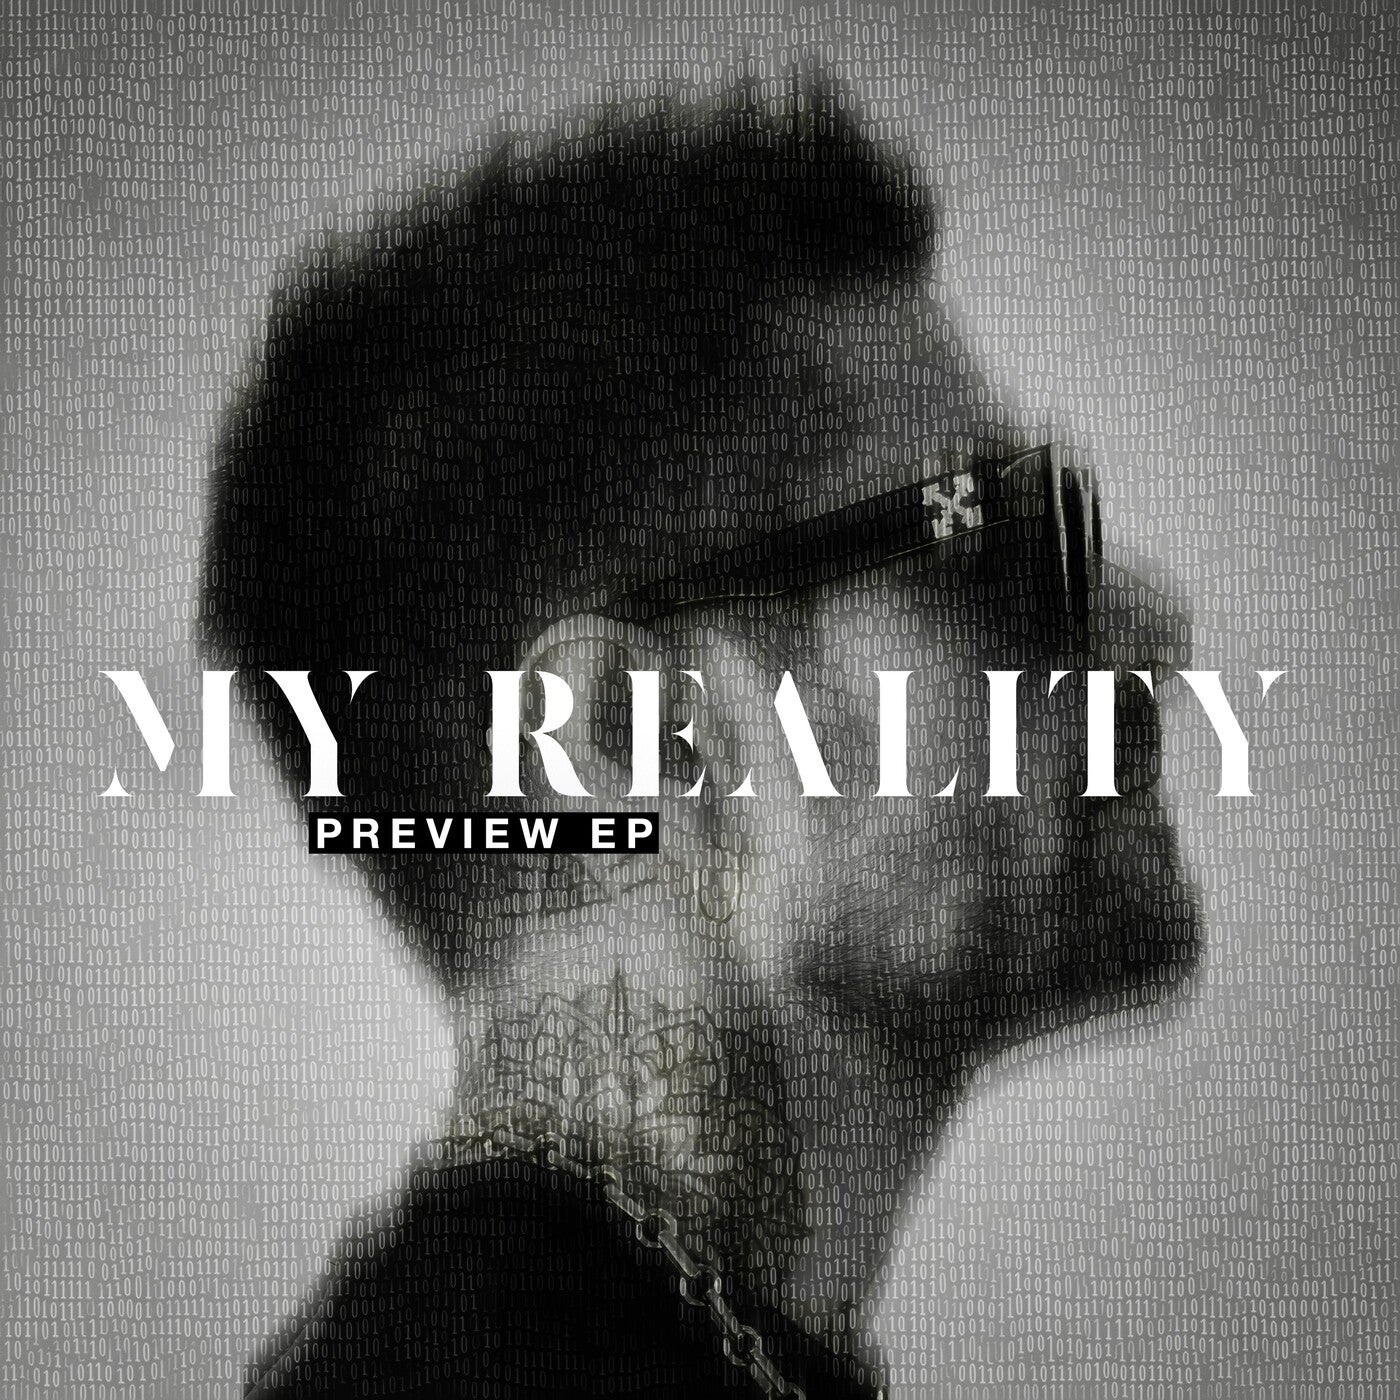 image cover: Rafael Cerato - "My Reality" Preview EP on Systematic Recordings